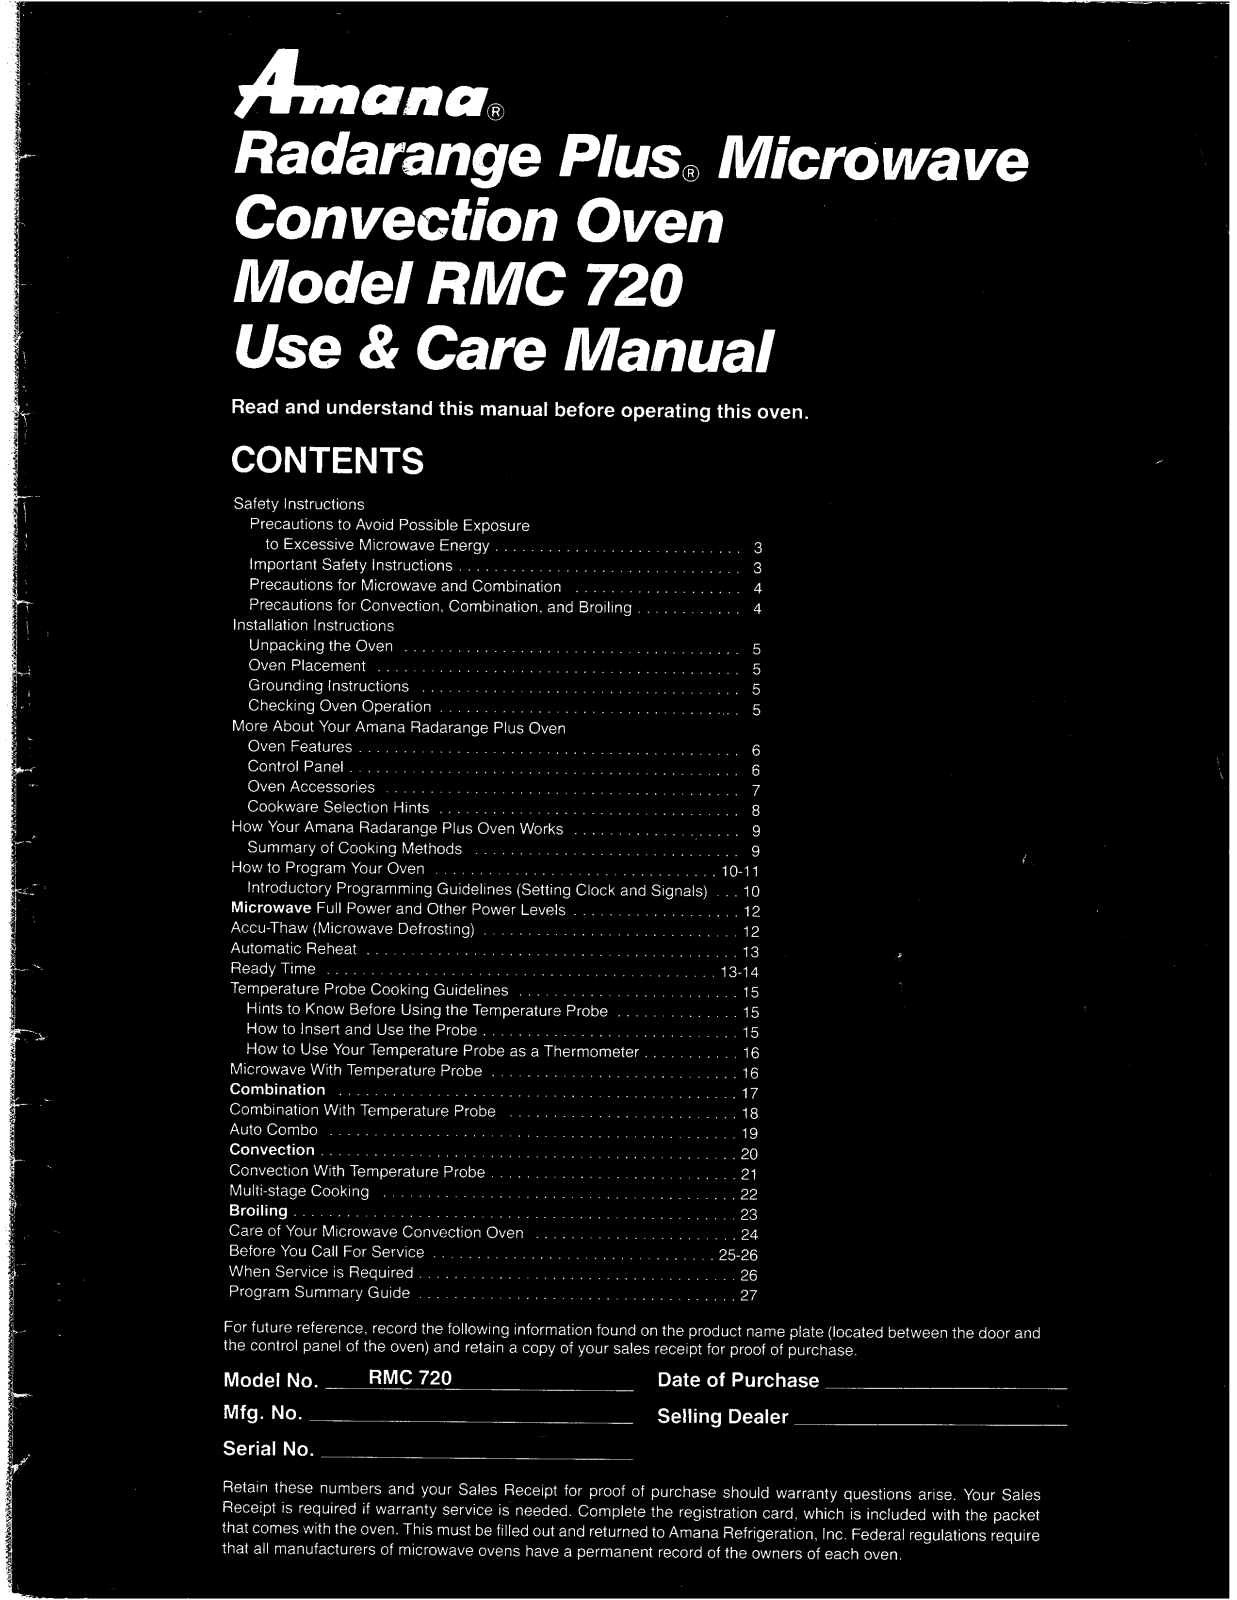 Amana RMC720 Owner's Manual